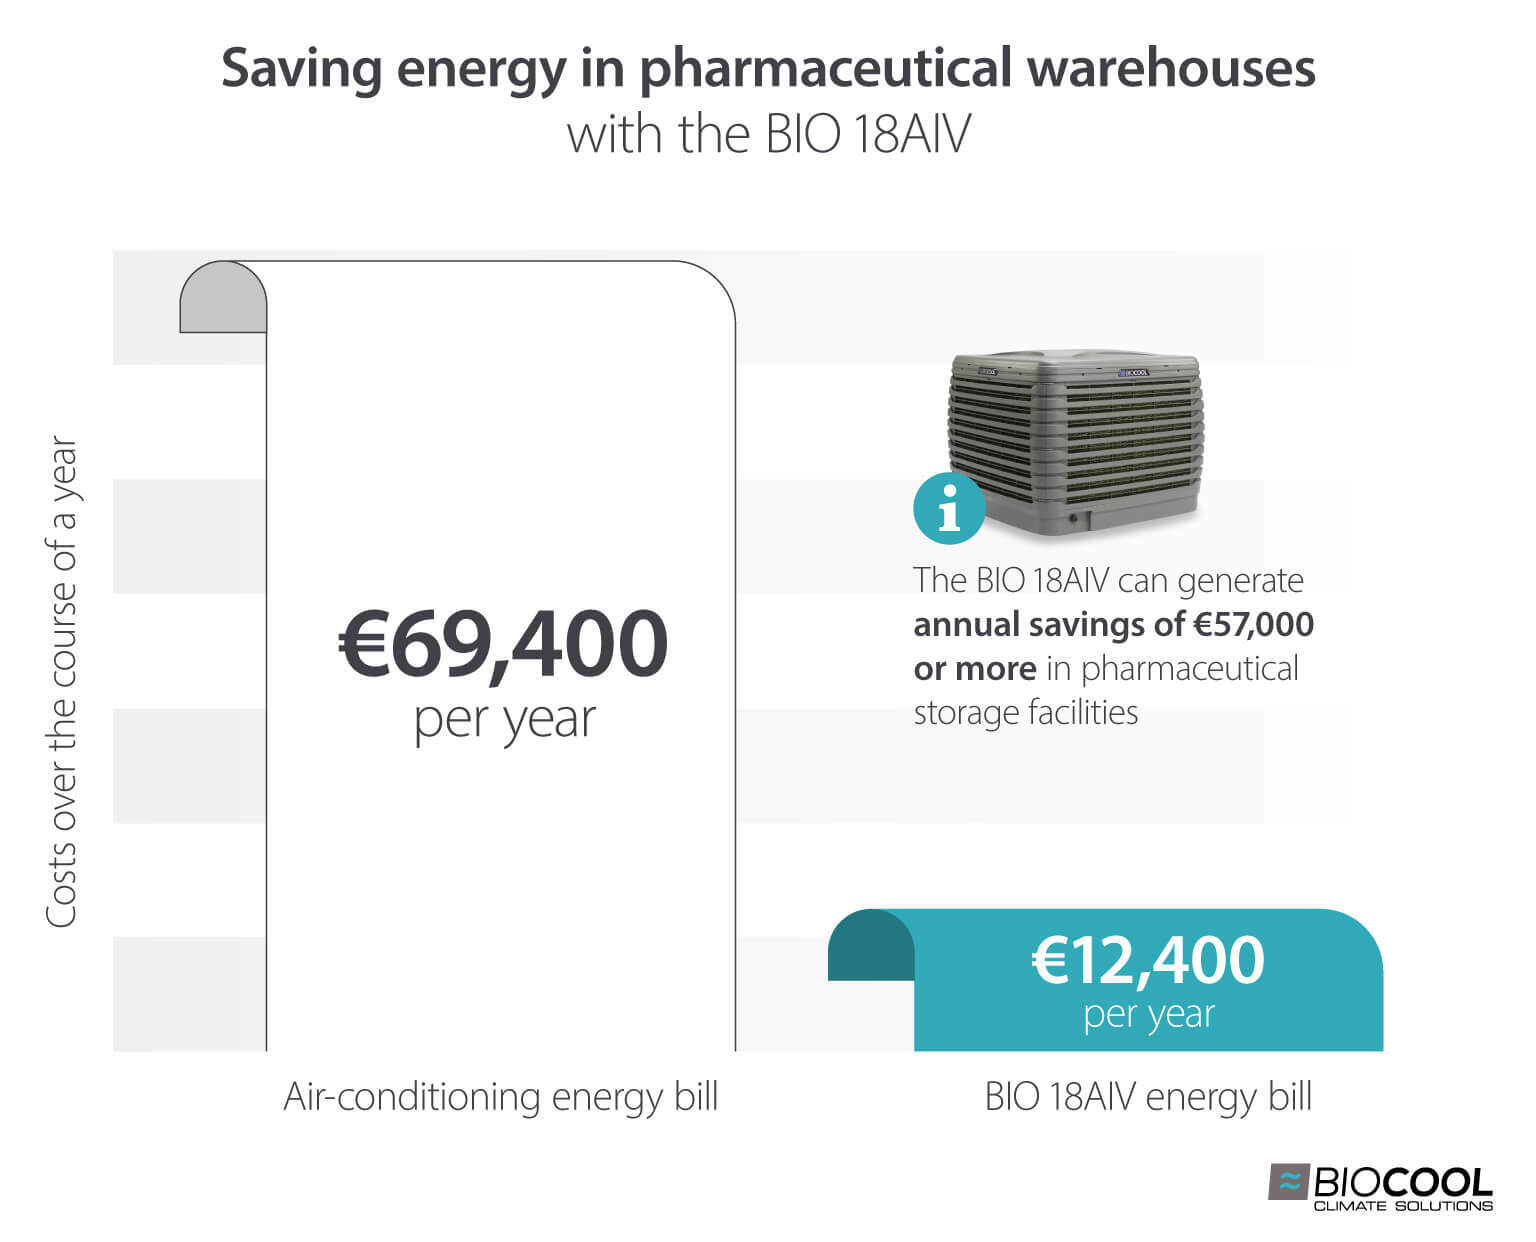 Evaporative cooler energy saving in pharmaceutical warehouses saving over €57,000 per year compared to air conditioning - infographic image